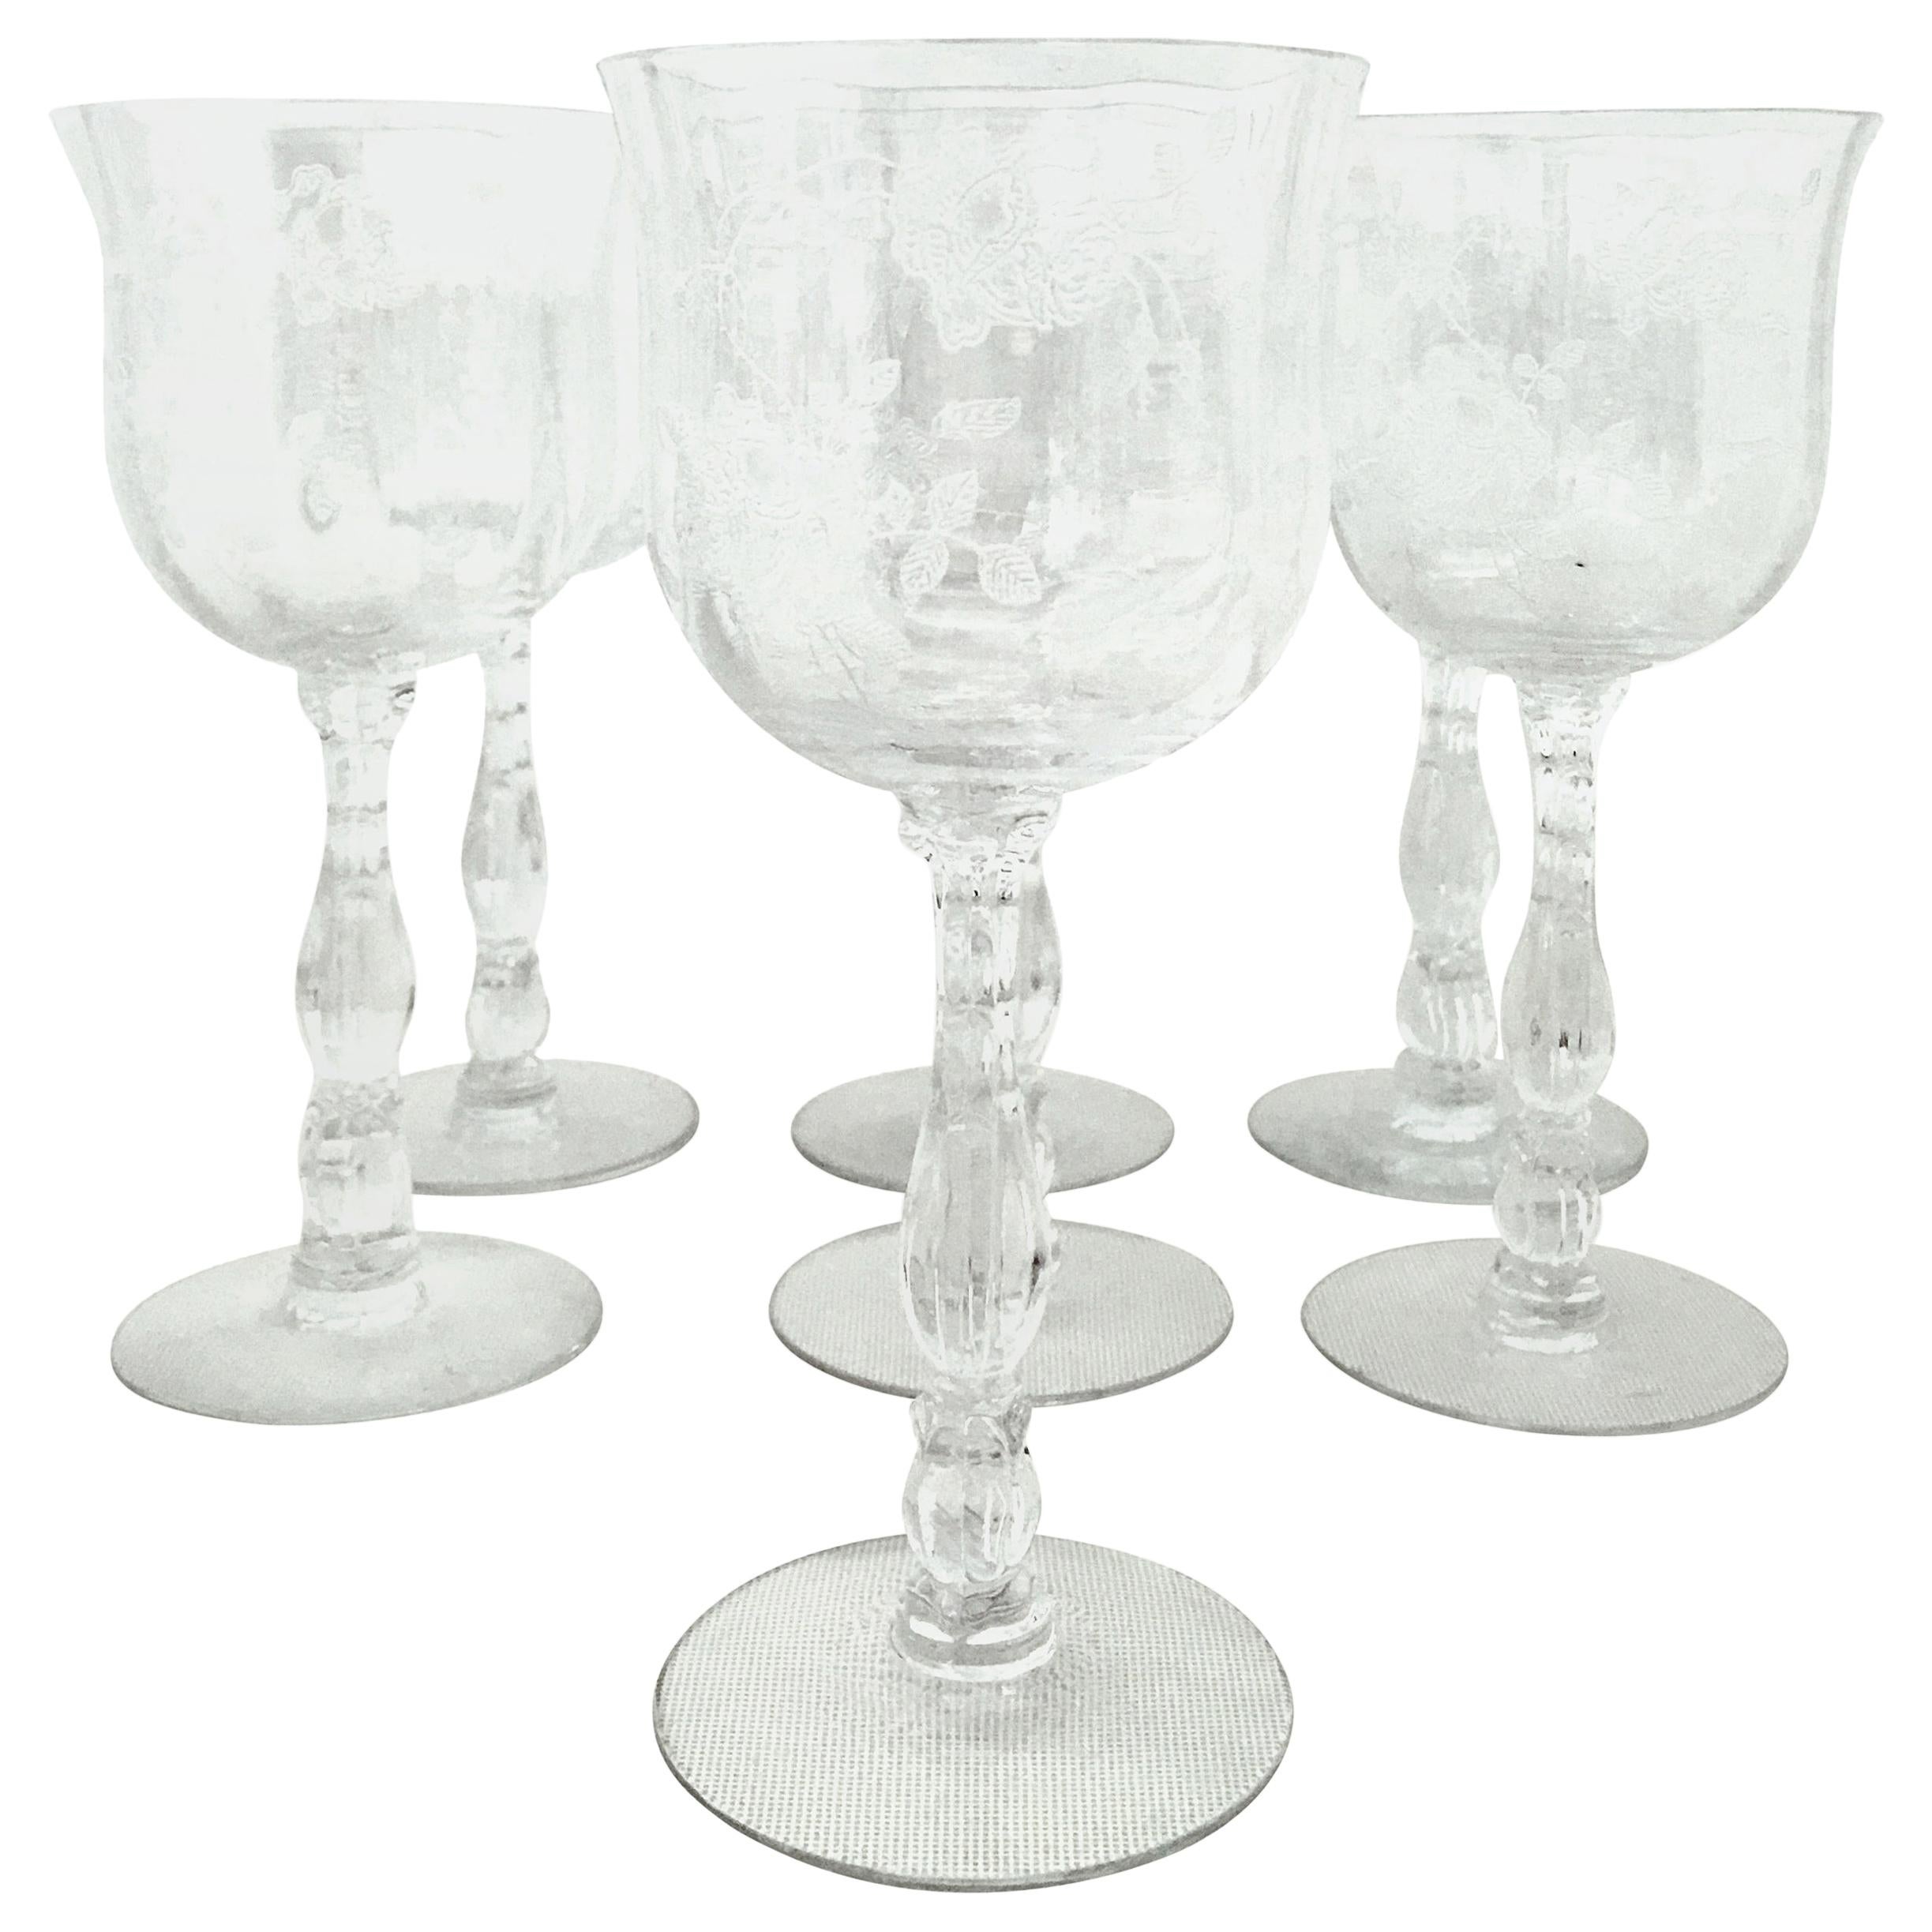 Mid-20th Century American Etched Crystal Stem Glasses Set of Seven Pieces